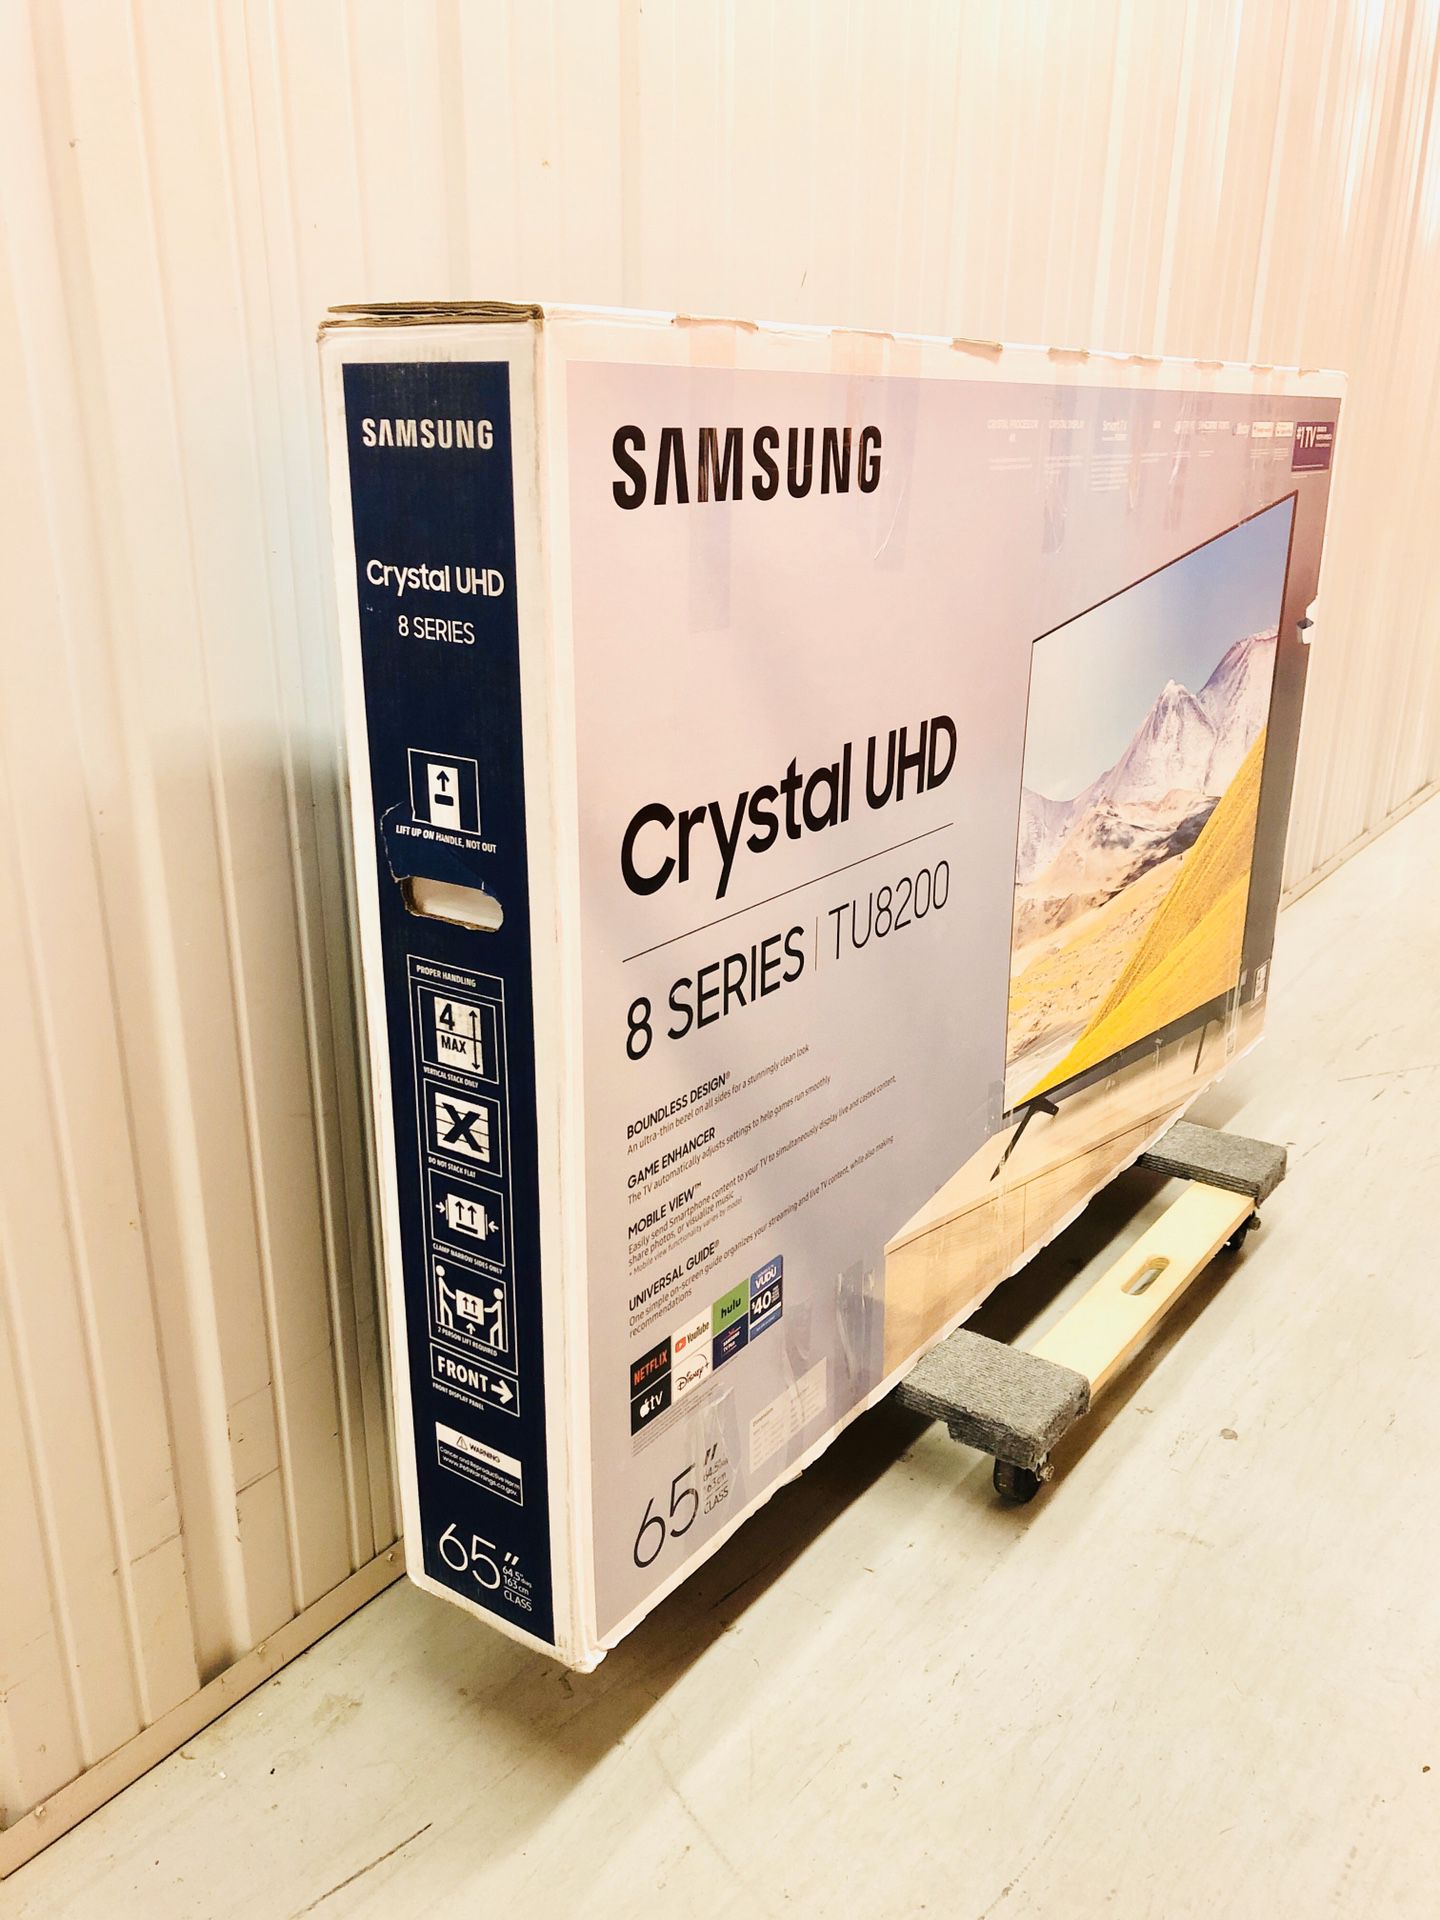 Samsung 65” Class 4K Crystal UHD (2160P) LED Smart TV with HDR Samsung UN65TU8200 Brand New In Box 2020 Model